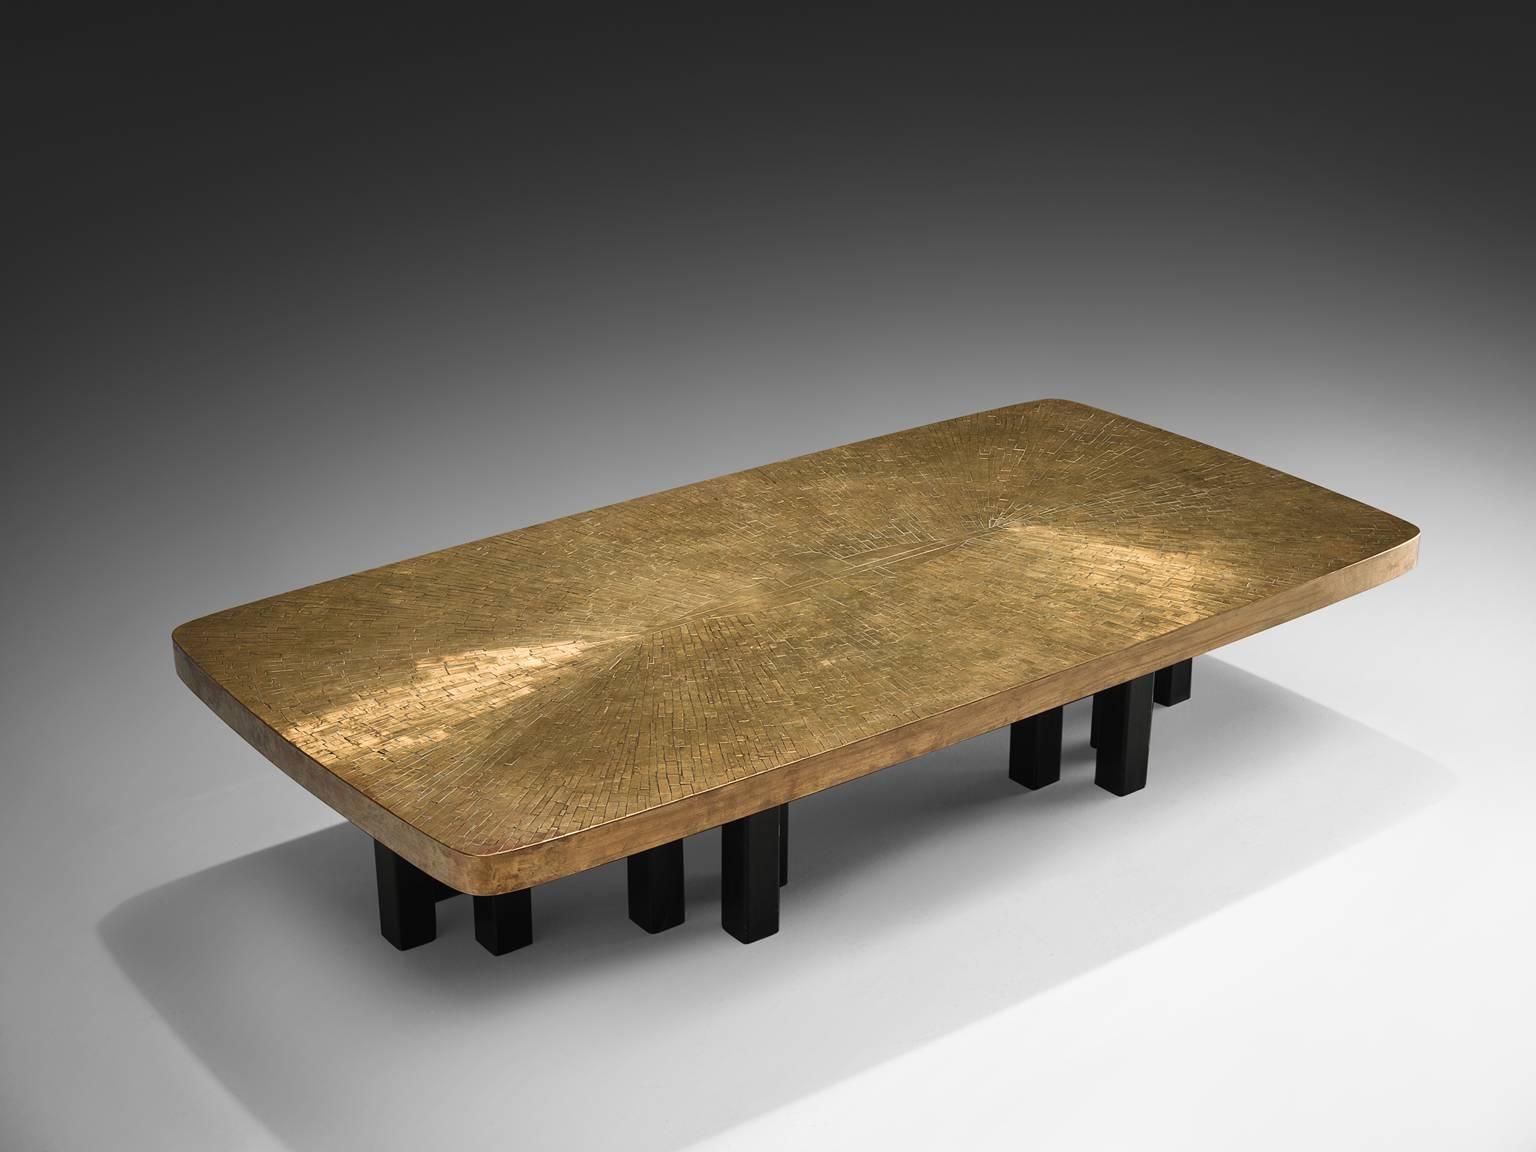 Jean Claude Dresse, brass and steel, Belgium, circa 1970.

This sculptural coffee table by Dresse was a private commission for a the interior of a Belgian diamond merchant from Antwerp. This example is of a spectacular size (measuring 180cm/6t)